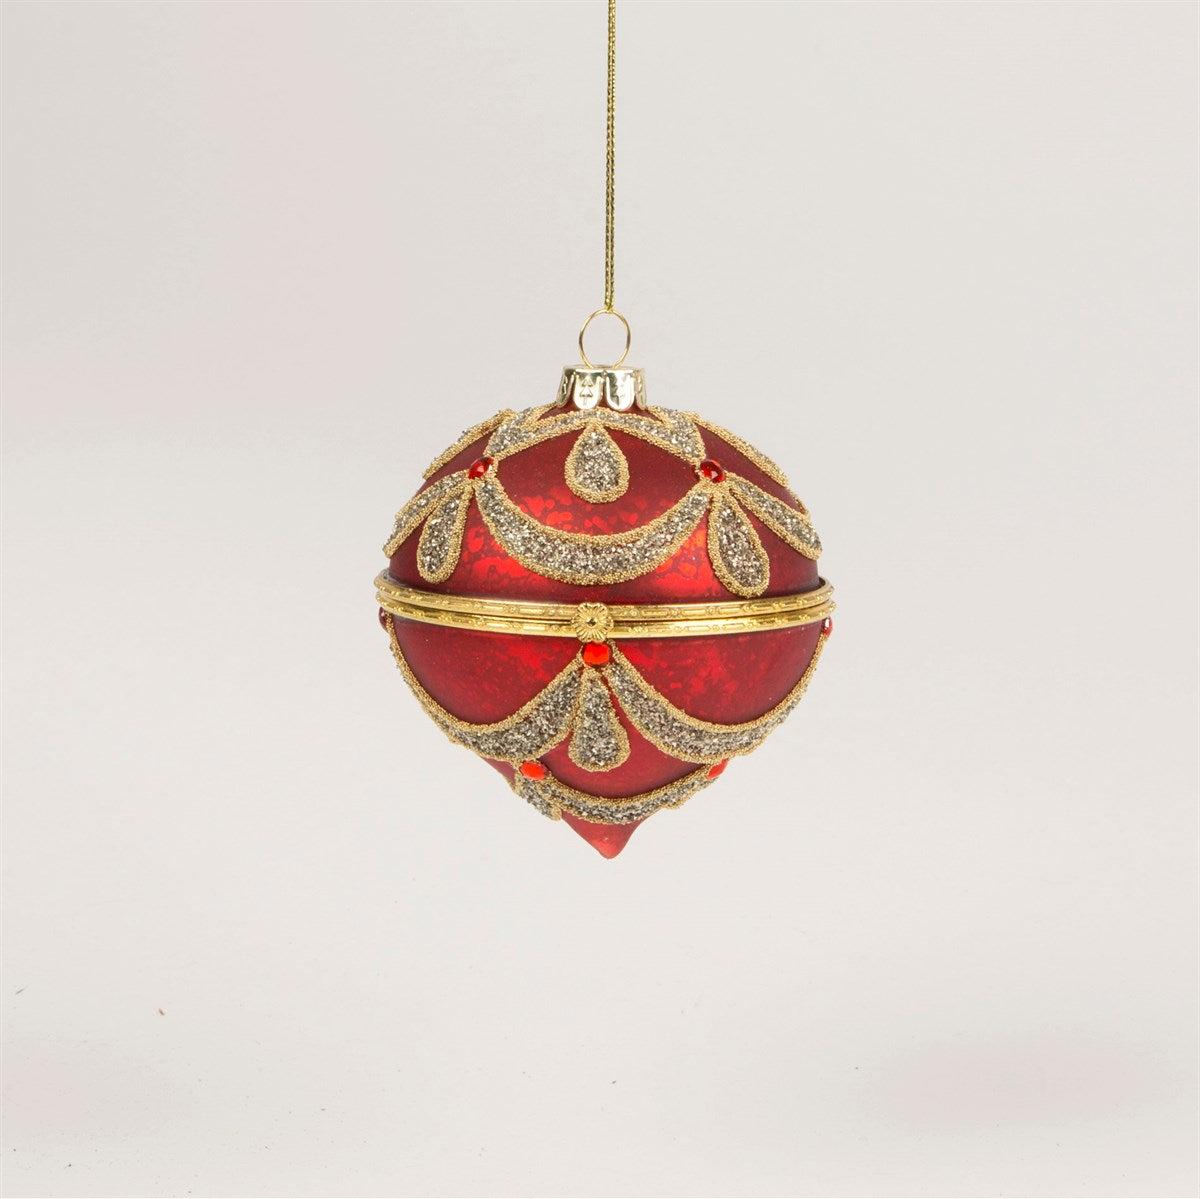 Red and gold glittery bauble that opens for a Christmas gift to hide in